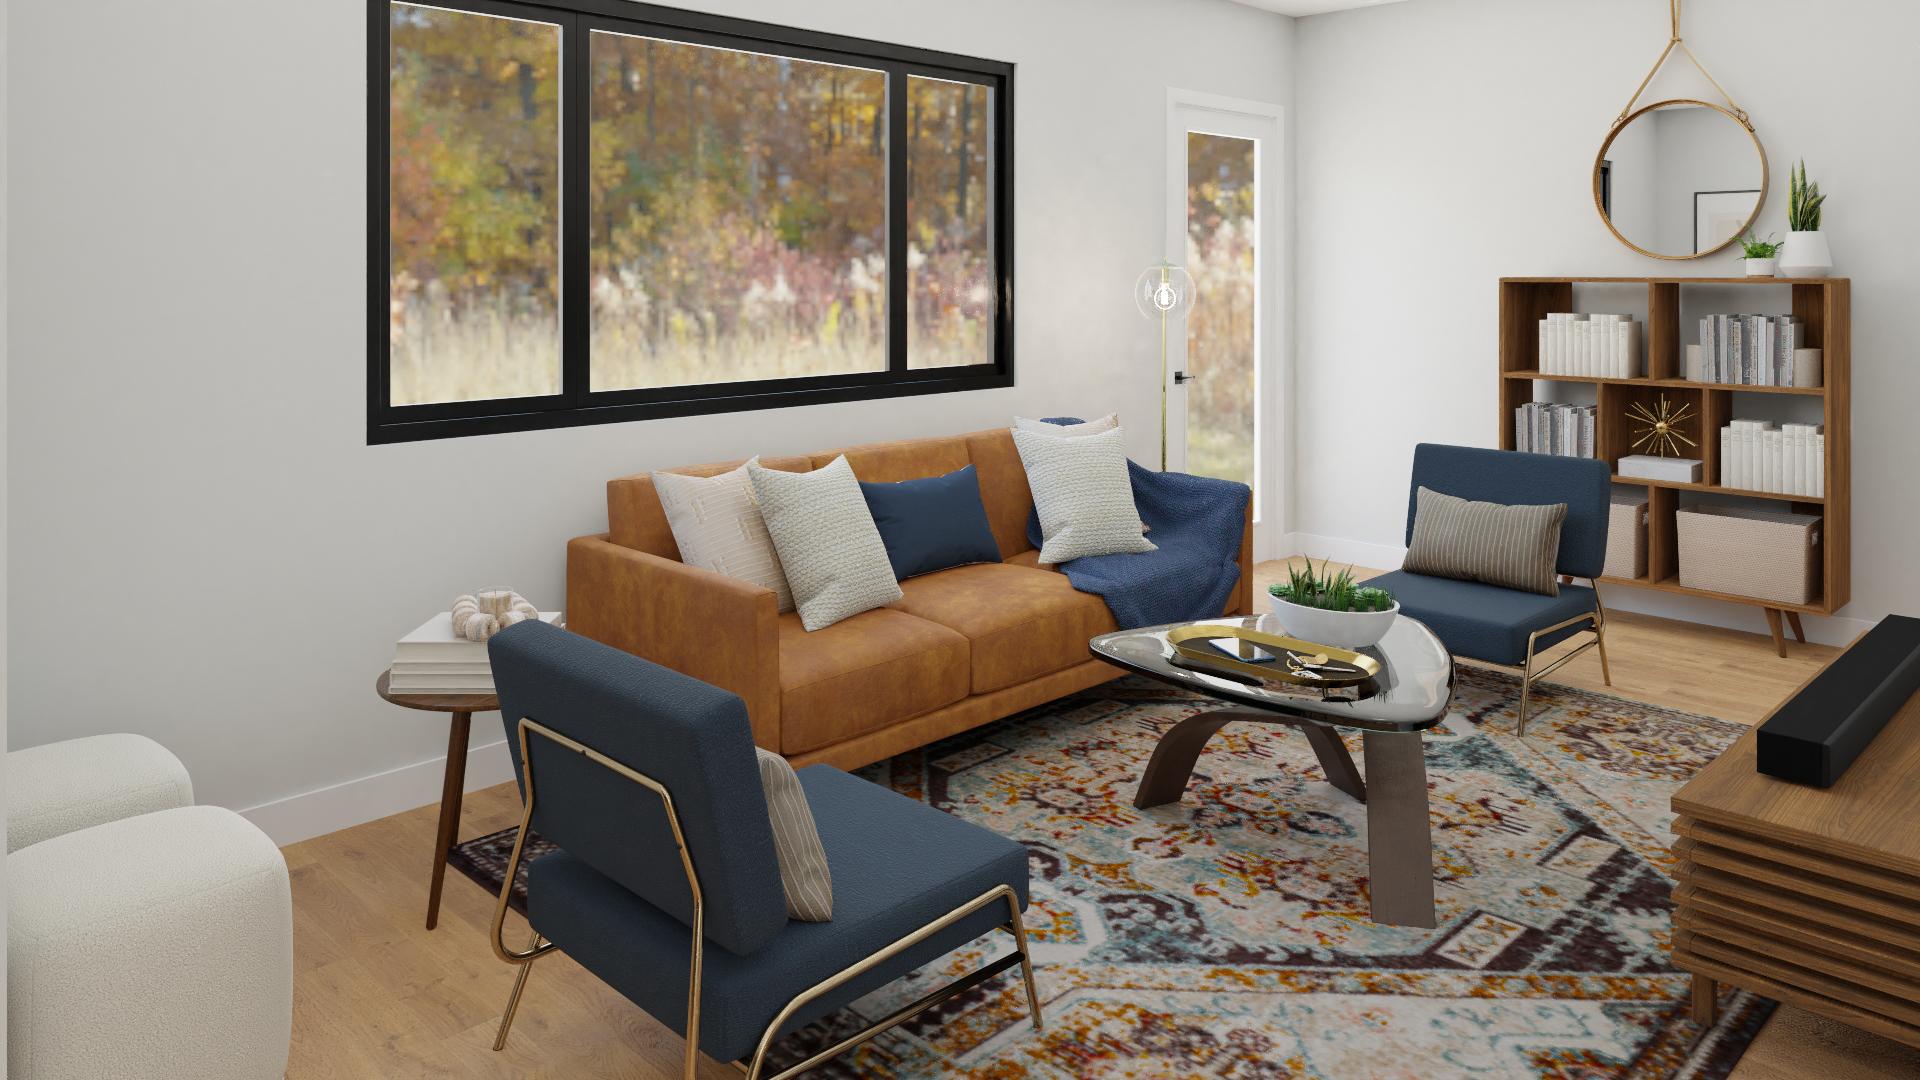 A Mid-Century Living Room With Dashes Of Gold Hues